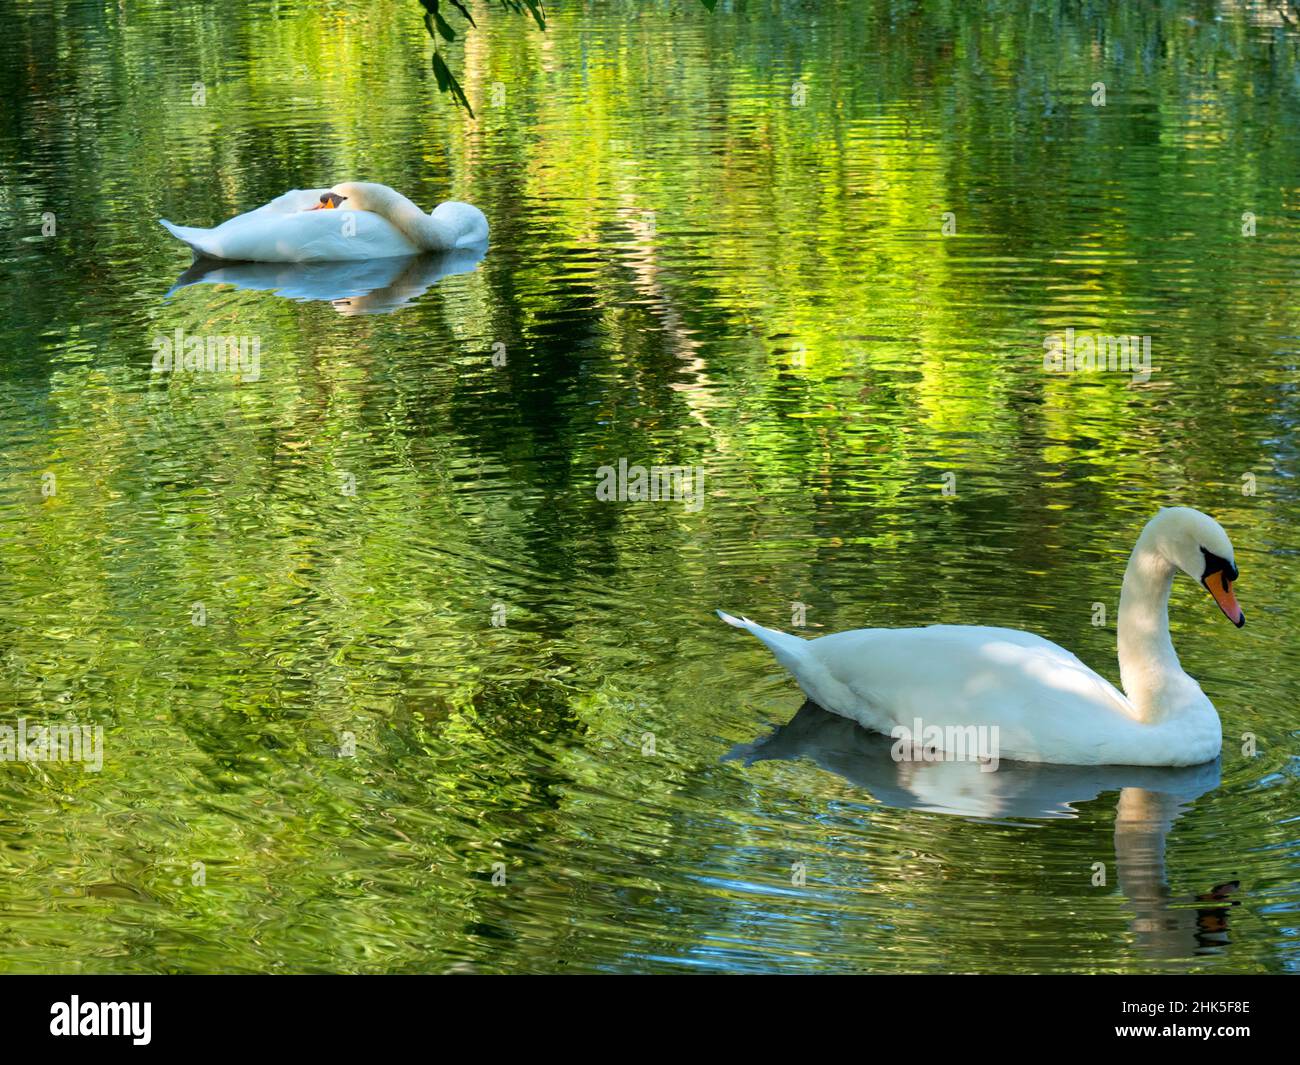 Here we see a pair of swans swimming on the River Cherwell, a small tributary of the Thames at Oxford. Summer foliage is reflected to create a vivid b Stock Photo